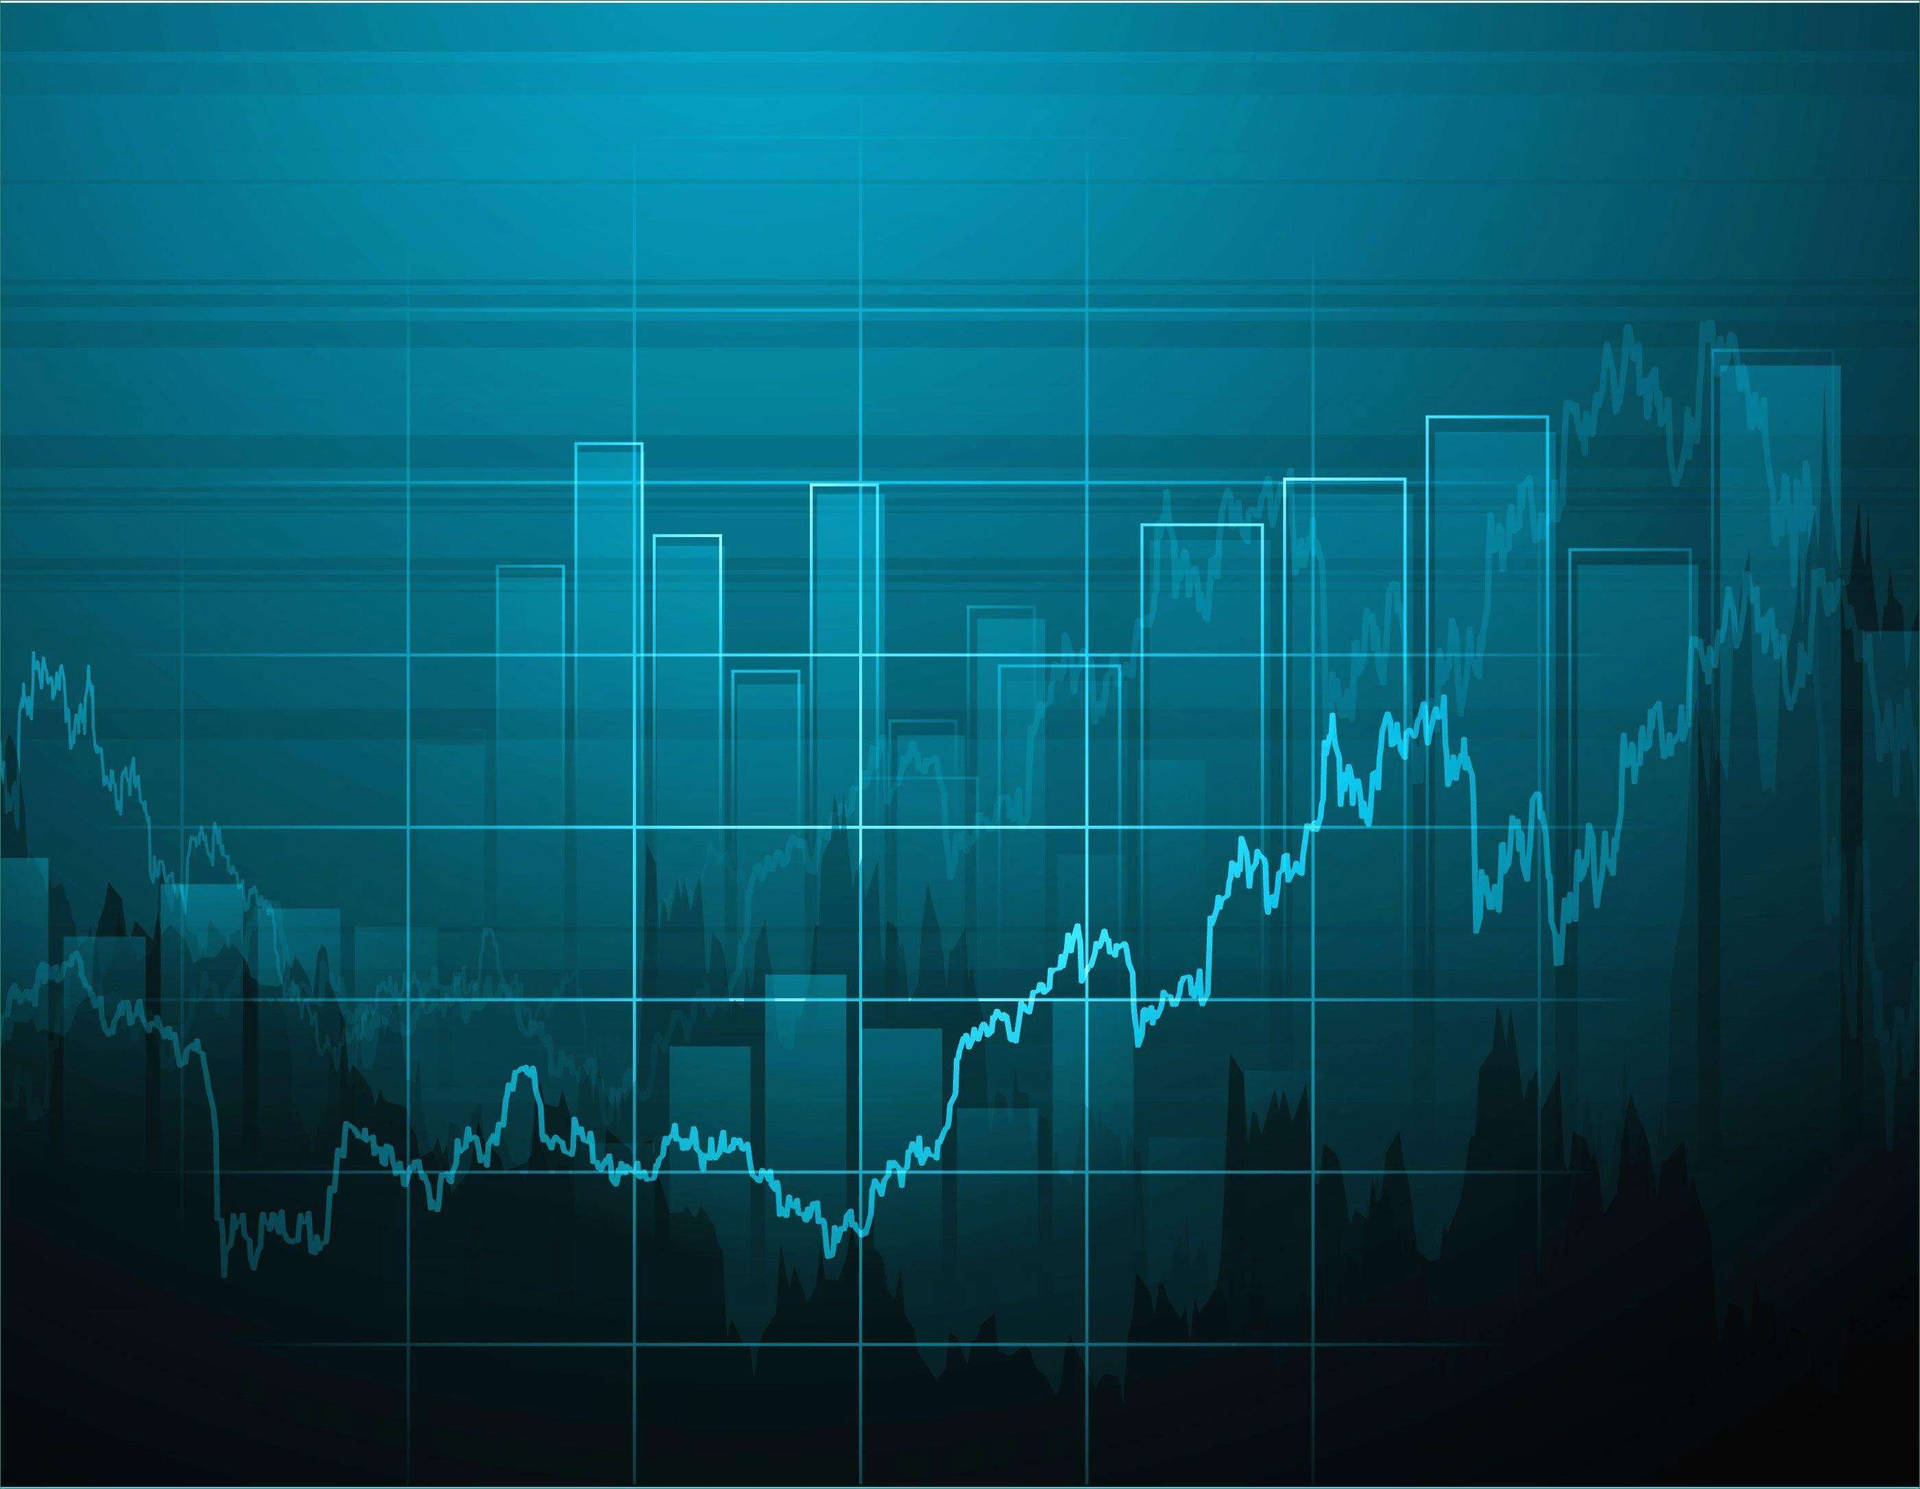 Free Stock Market Wallpaper Downloads, [100+] Stock Market Wallpapers for  FREE 